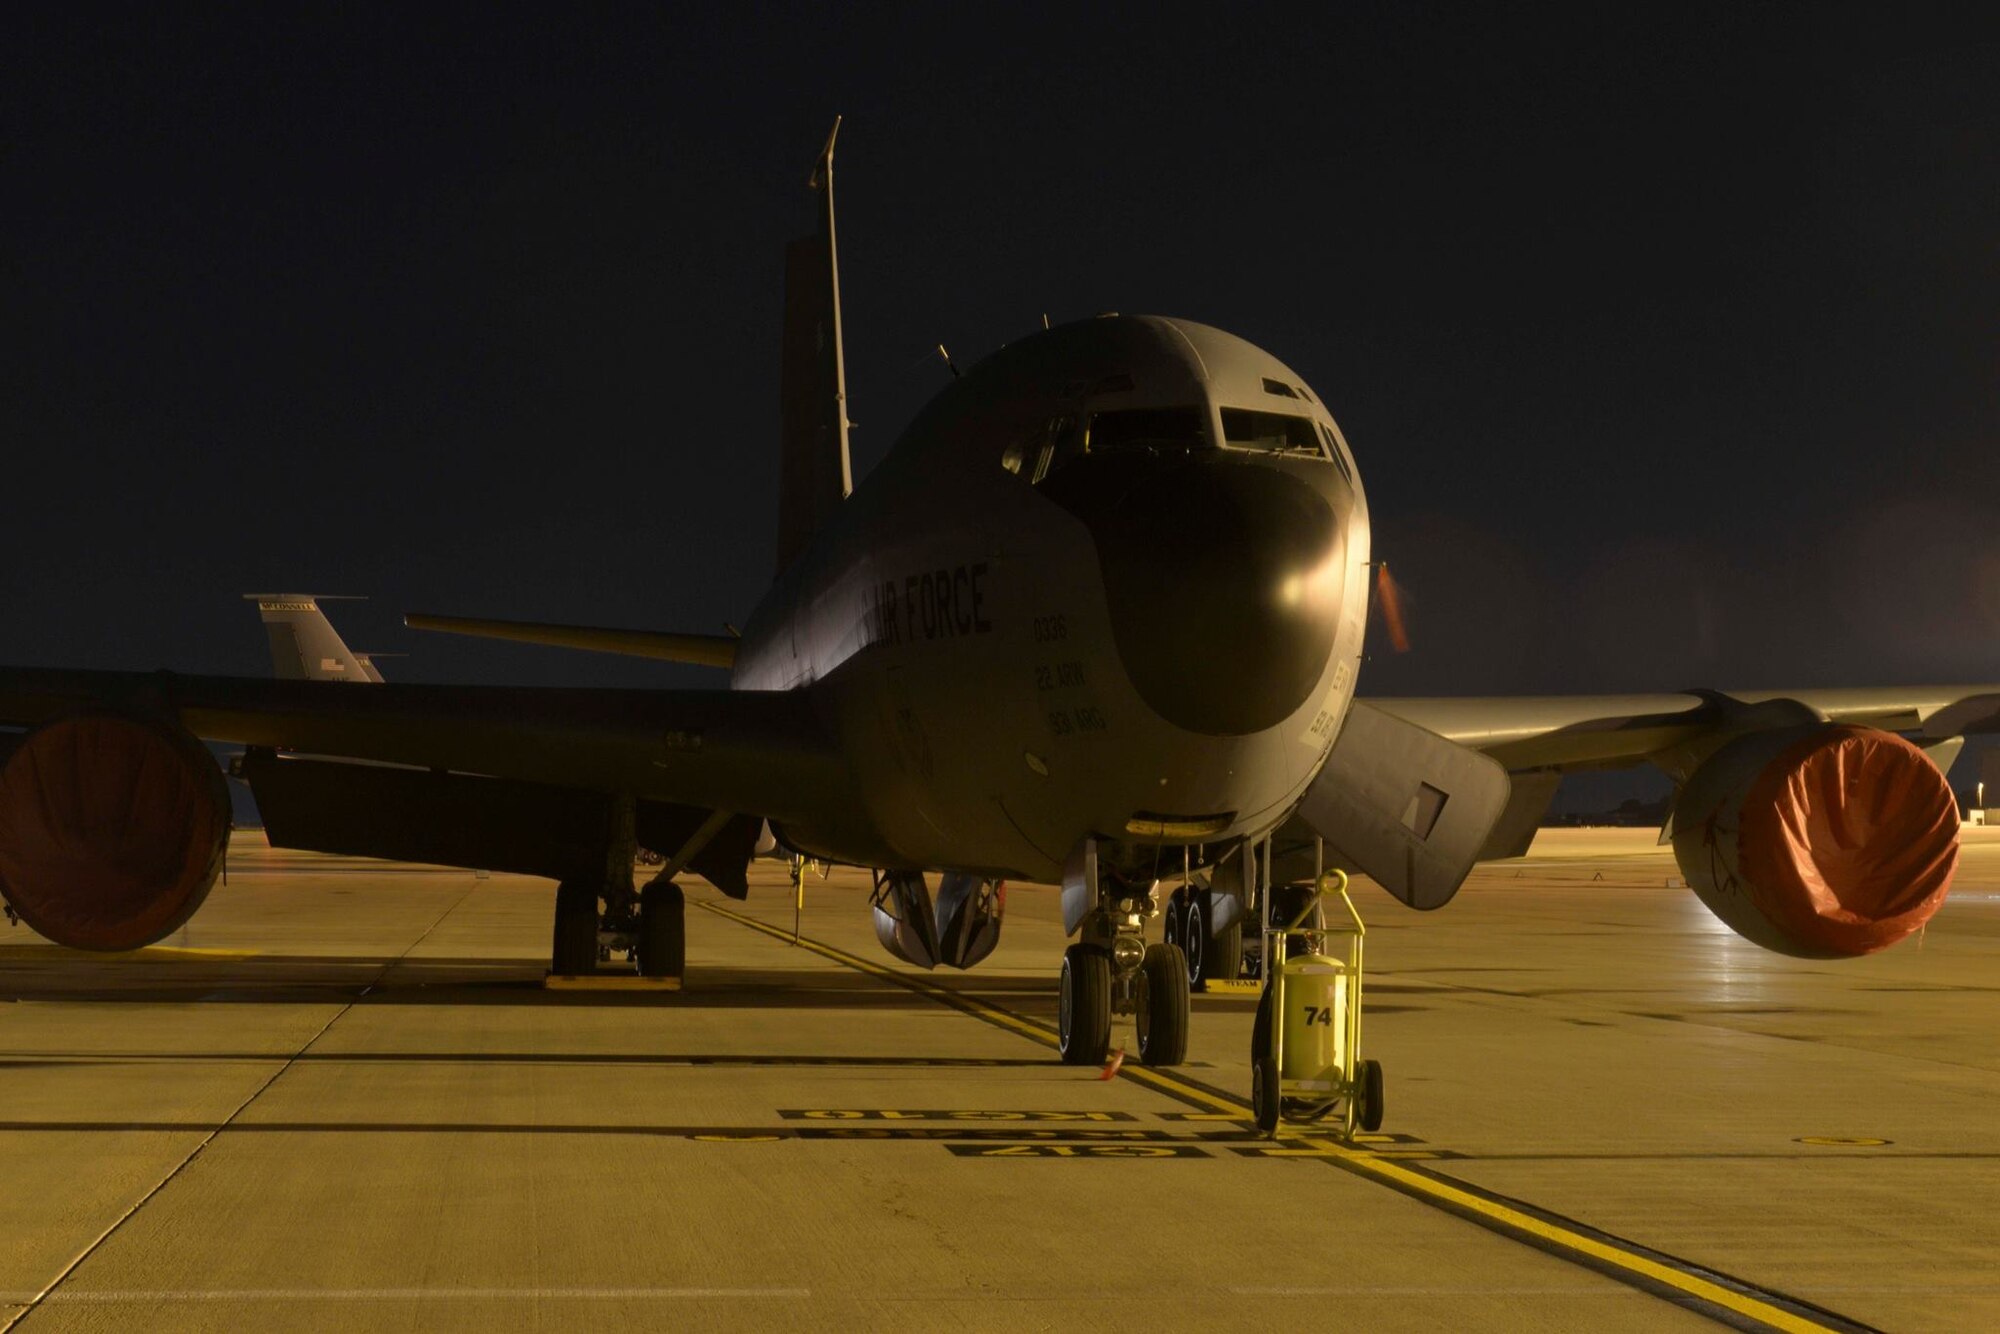 KC-135 Stratotanker sits on the flightline at McConnell Air Force Base, Kan., June 16, 2016. The KC-135 is the backbone of aerial refueling, and McConnell is the U.S. Air Force's premiere air refueling base with more Stratotankers than any other base. (U.S. Air Force photos/Airman 1st Class Christopher Thornbury)